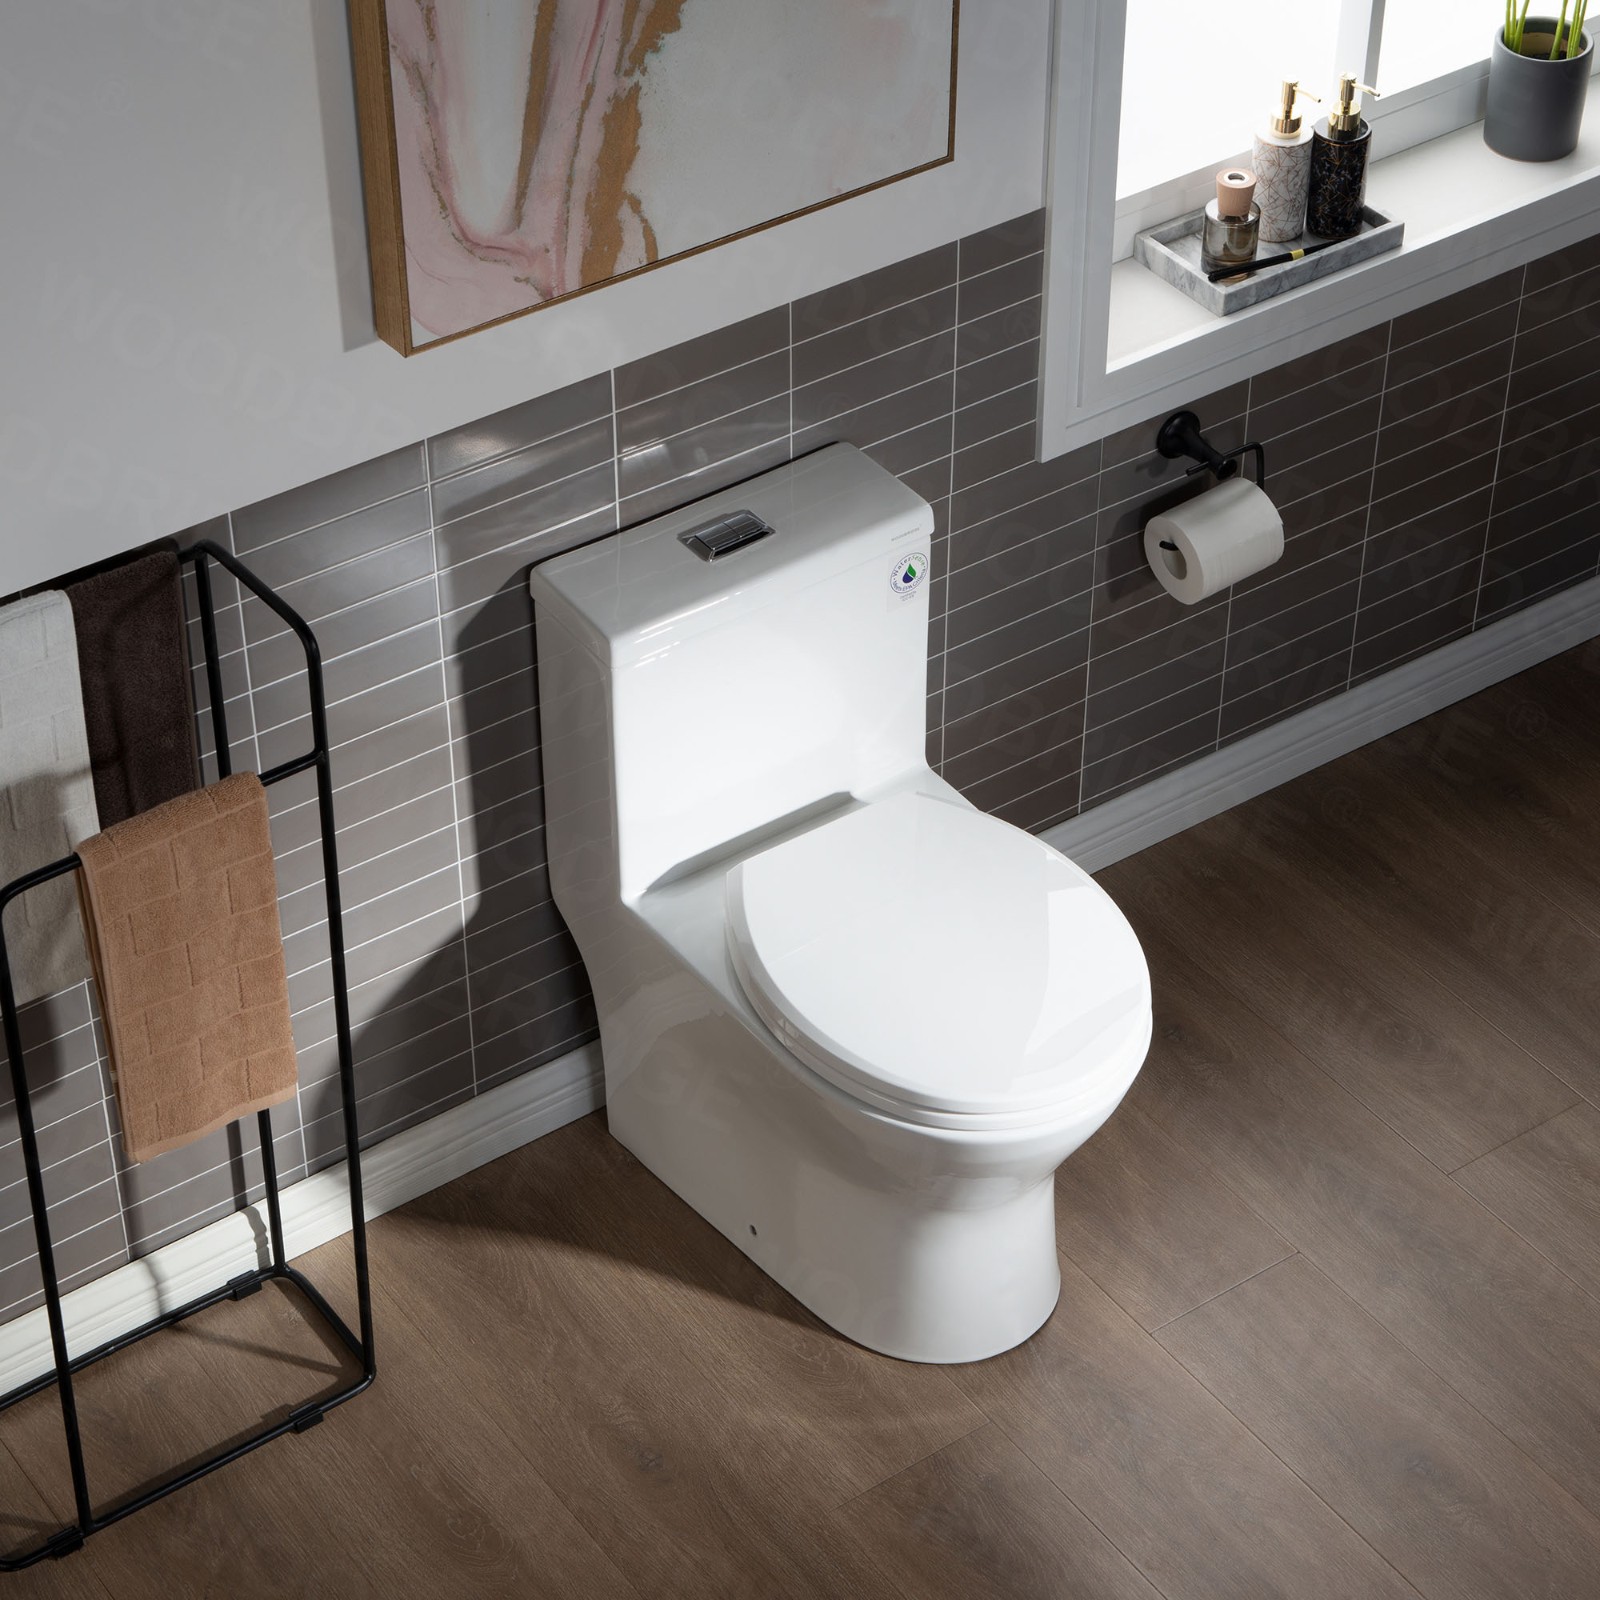  WOODBRIDGE B-0500-A Modern One-Piece Elongated toilet with Solf Closed Seat and Hand Free Touchless Sensor Flush Kit, White_5493